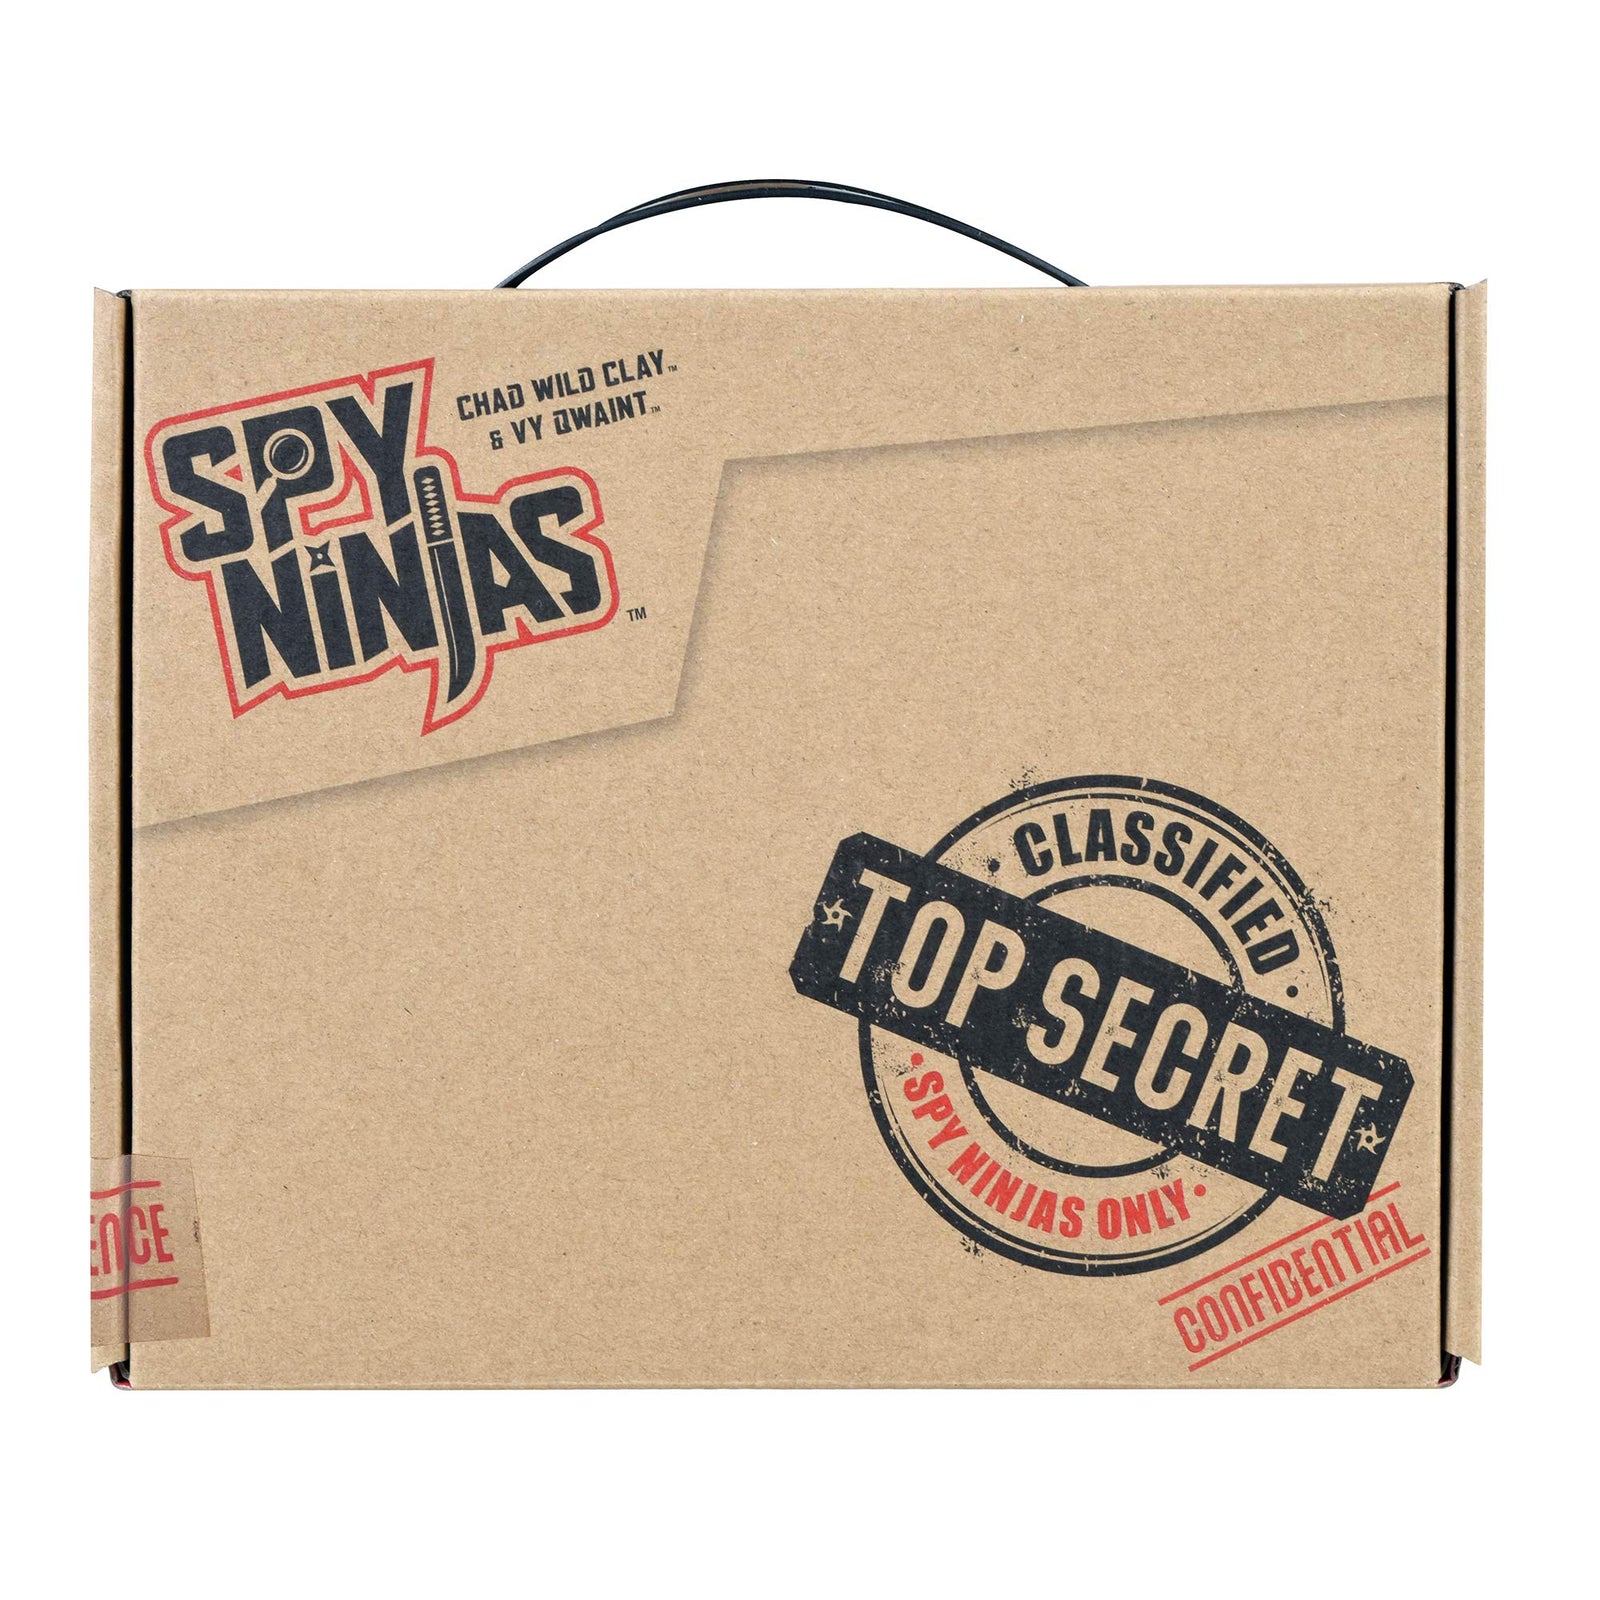 Spy Ninjas New Recruit Mission Kit from Vy Qwaint and Chad Wild Clay